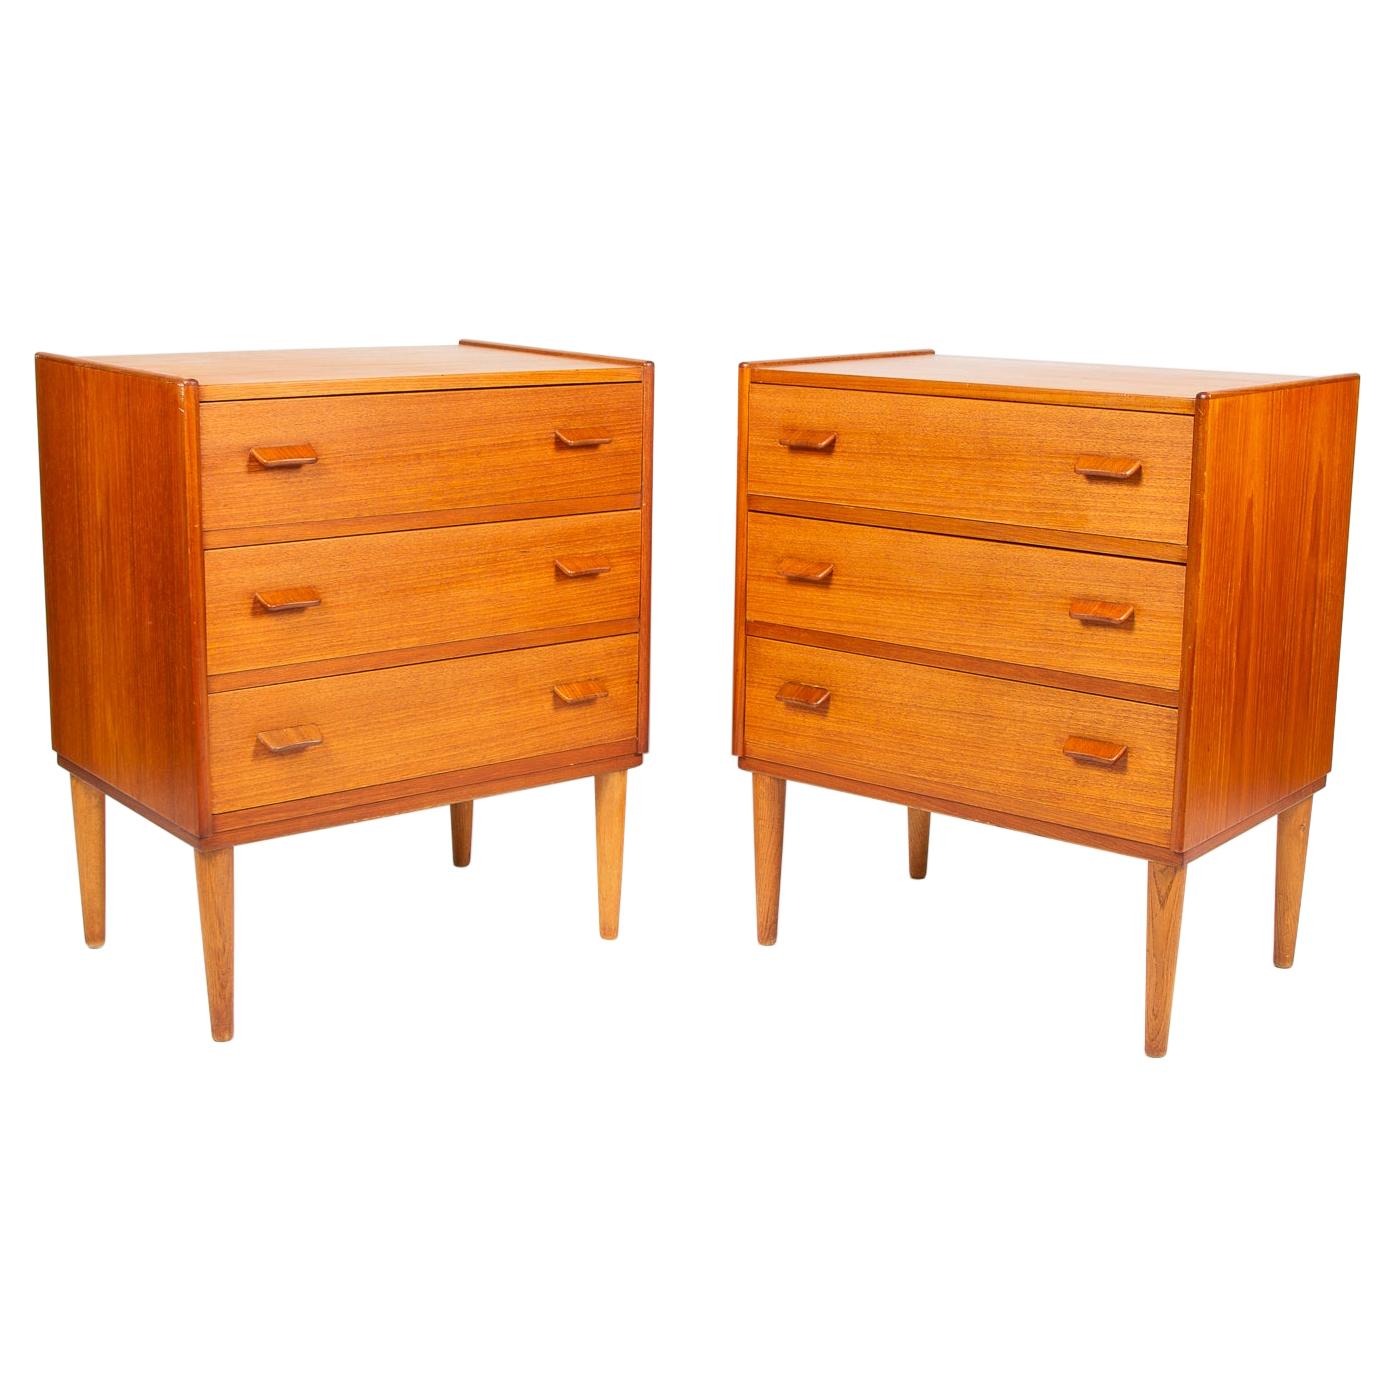 Teak Chest of Drawers Design by Poul Volther